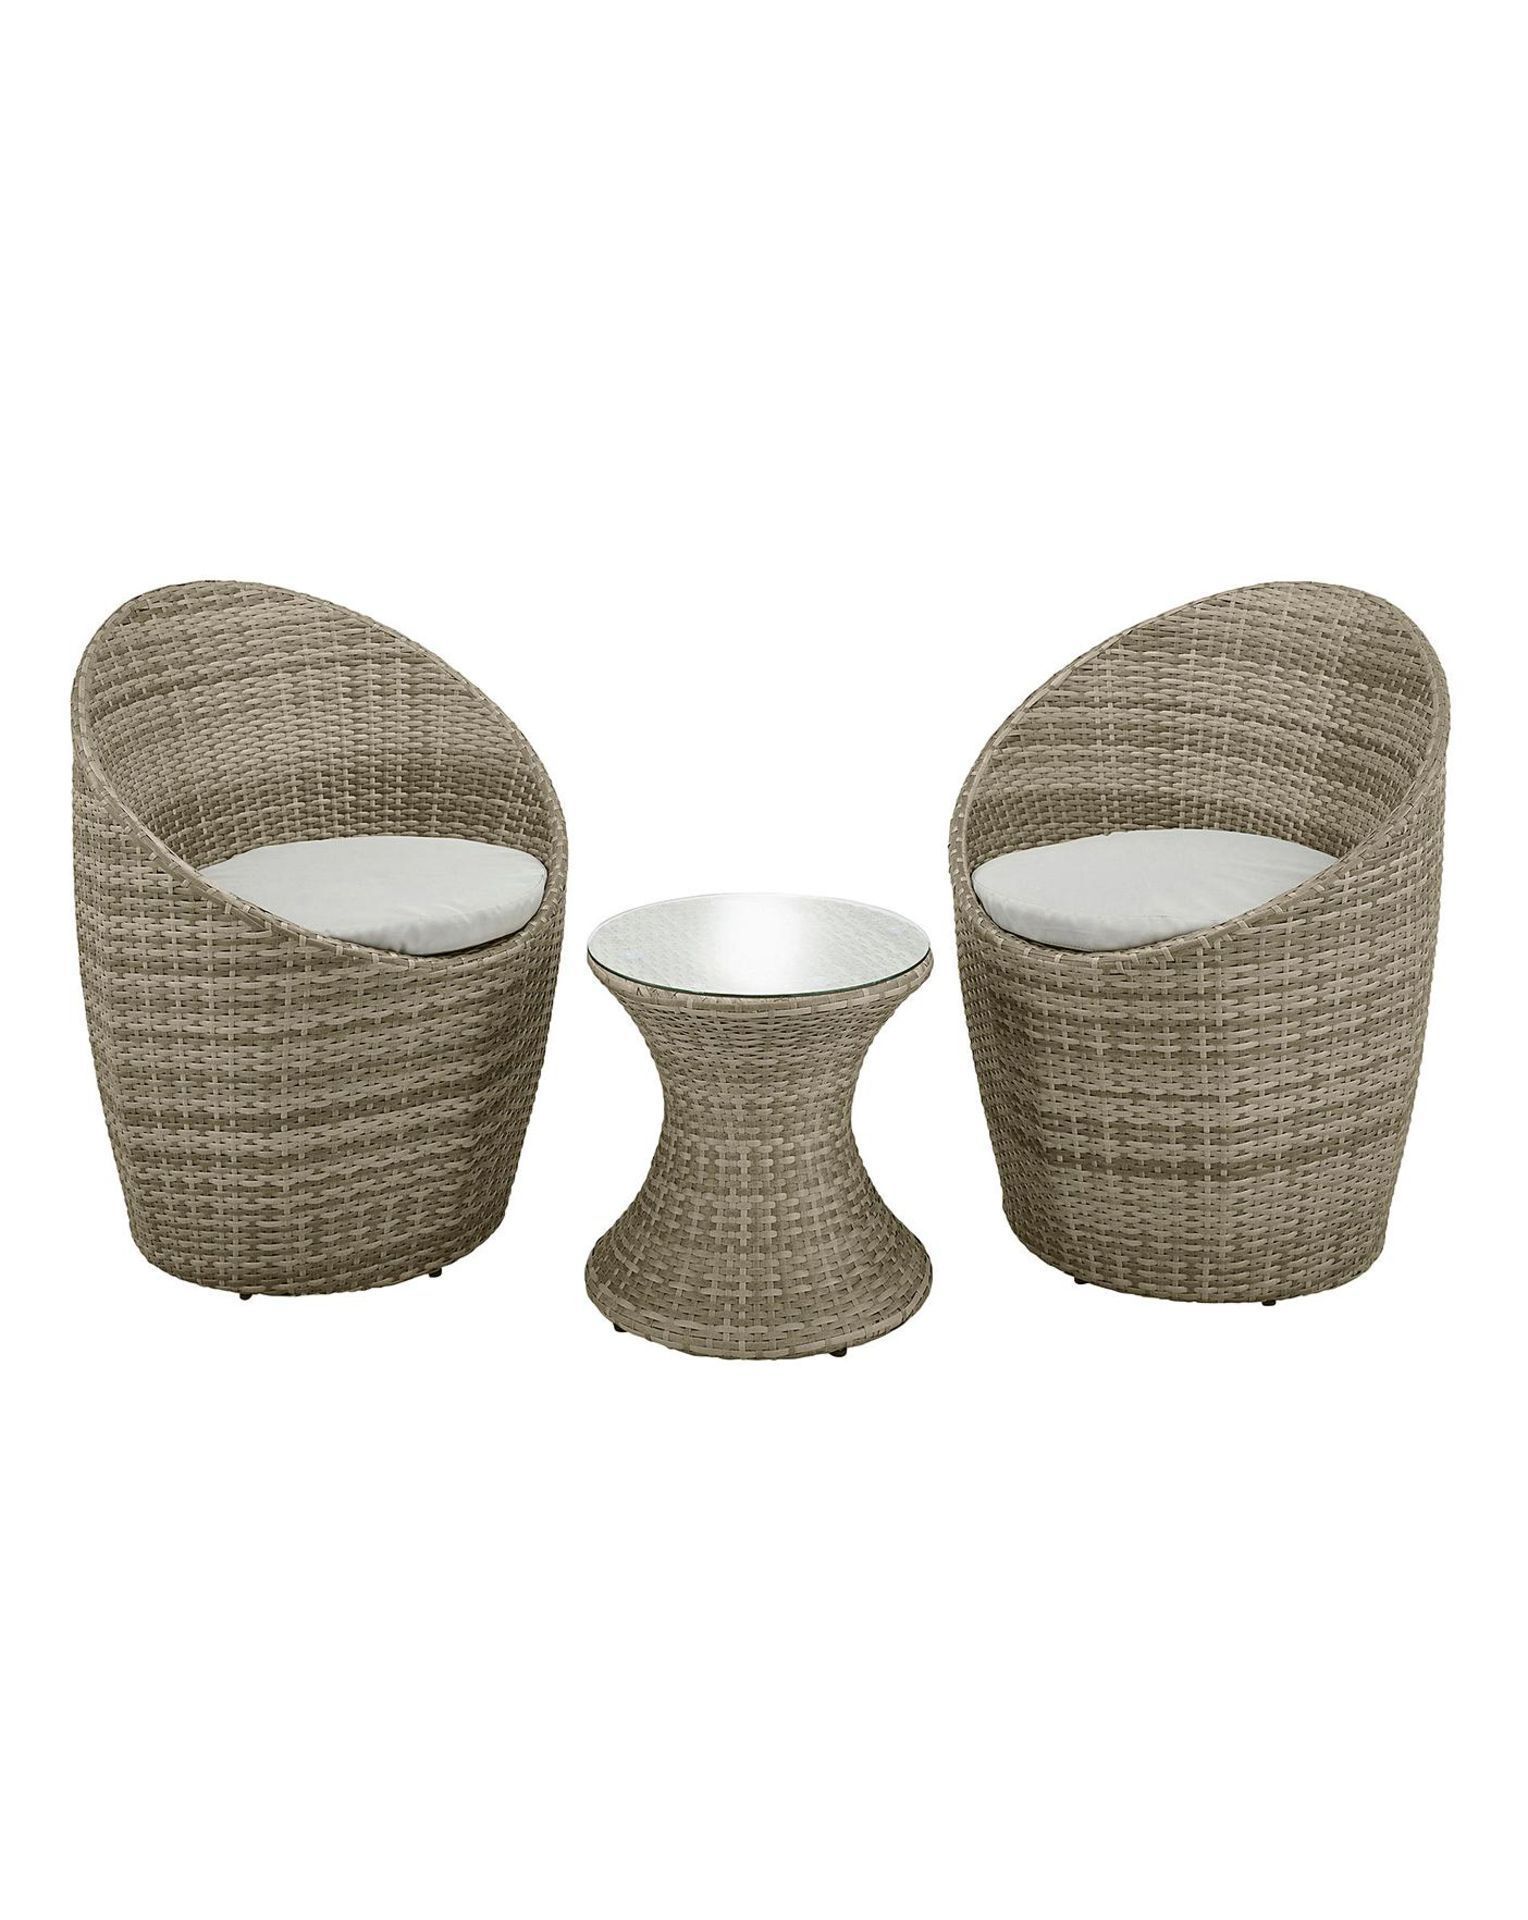 NEW & BOXED Luxury 3 Piece Pula Bistro Lounge Set. RRP £399.99. (ERC) This modern durable set is - Image 2 of 3